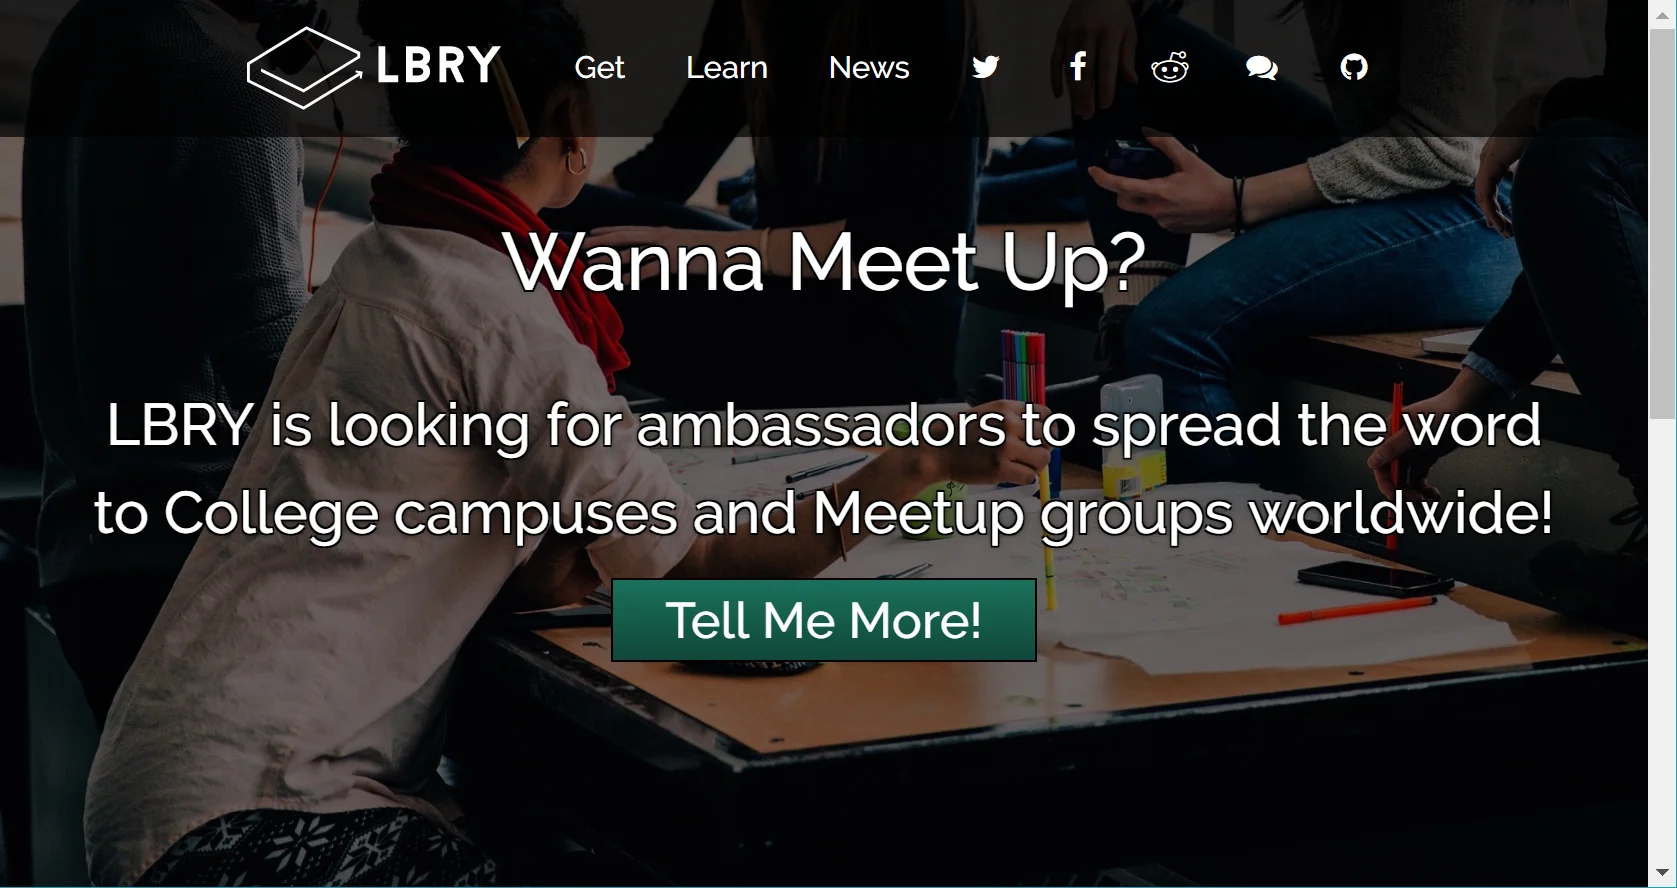 Meetup and College initiative